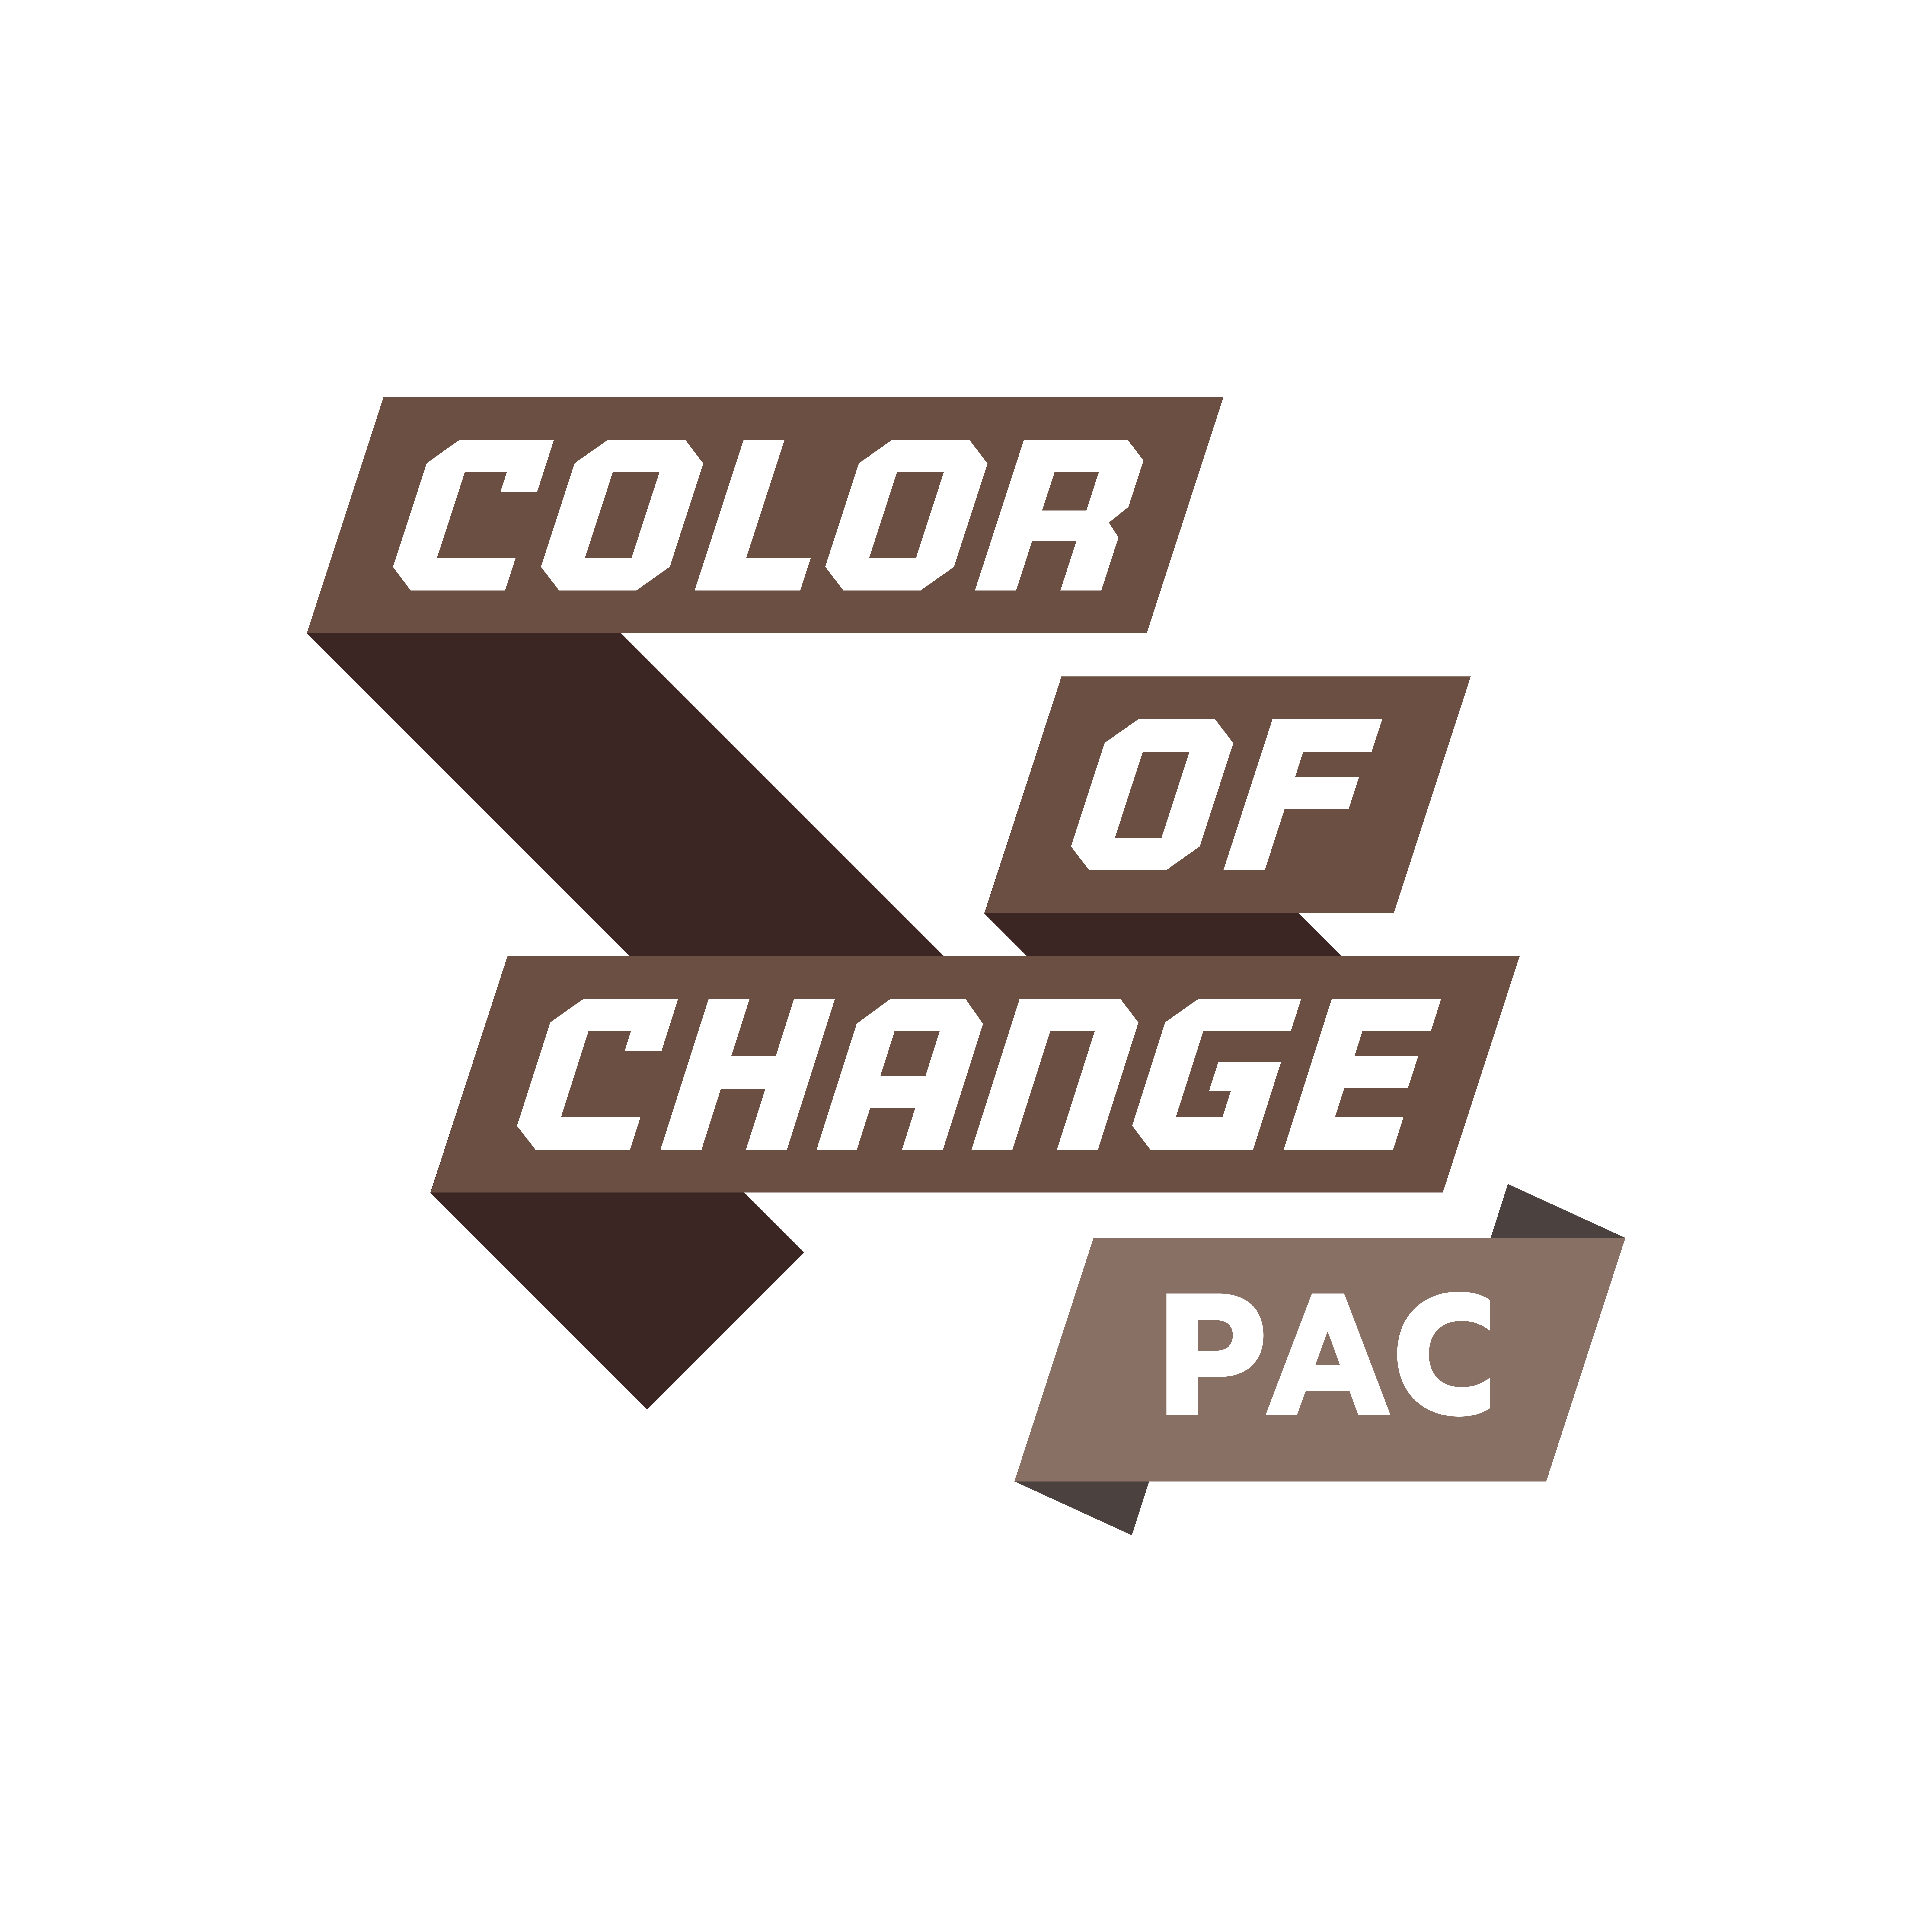 Color Of Change PAC